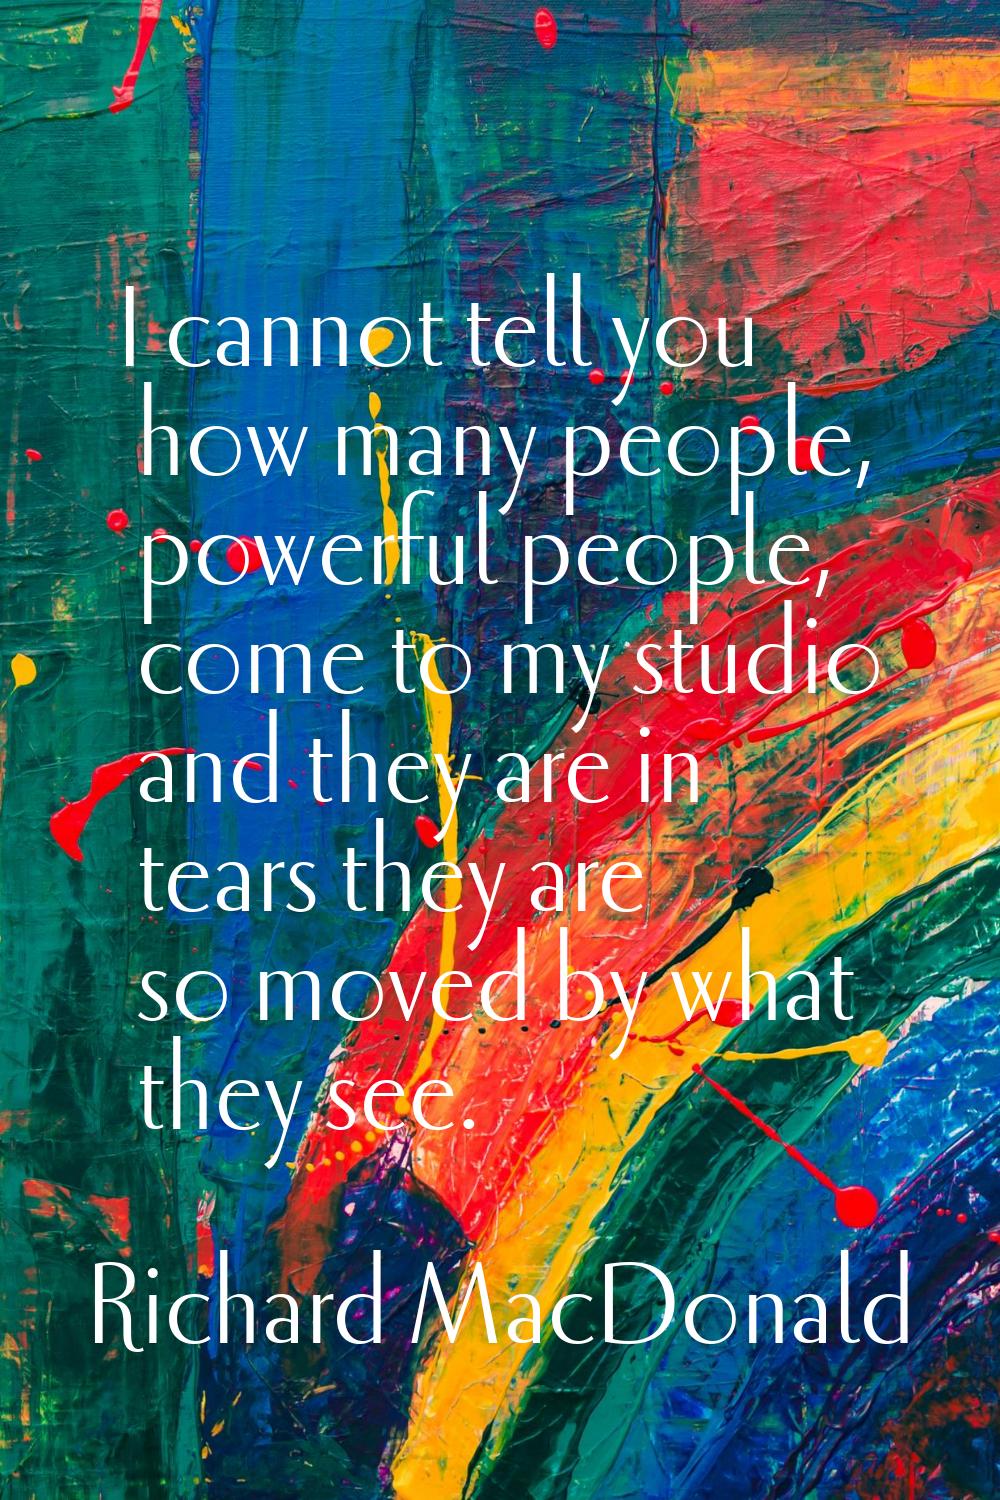 I cannot tell you how many people, powerful people, come to my studio and they are in tears they ar